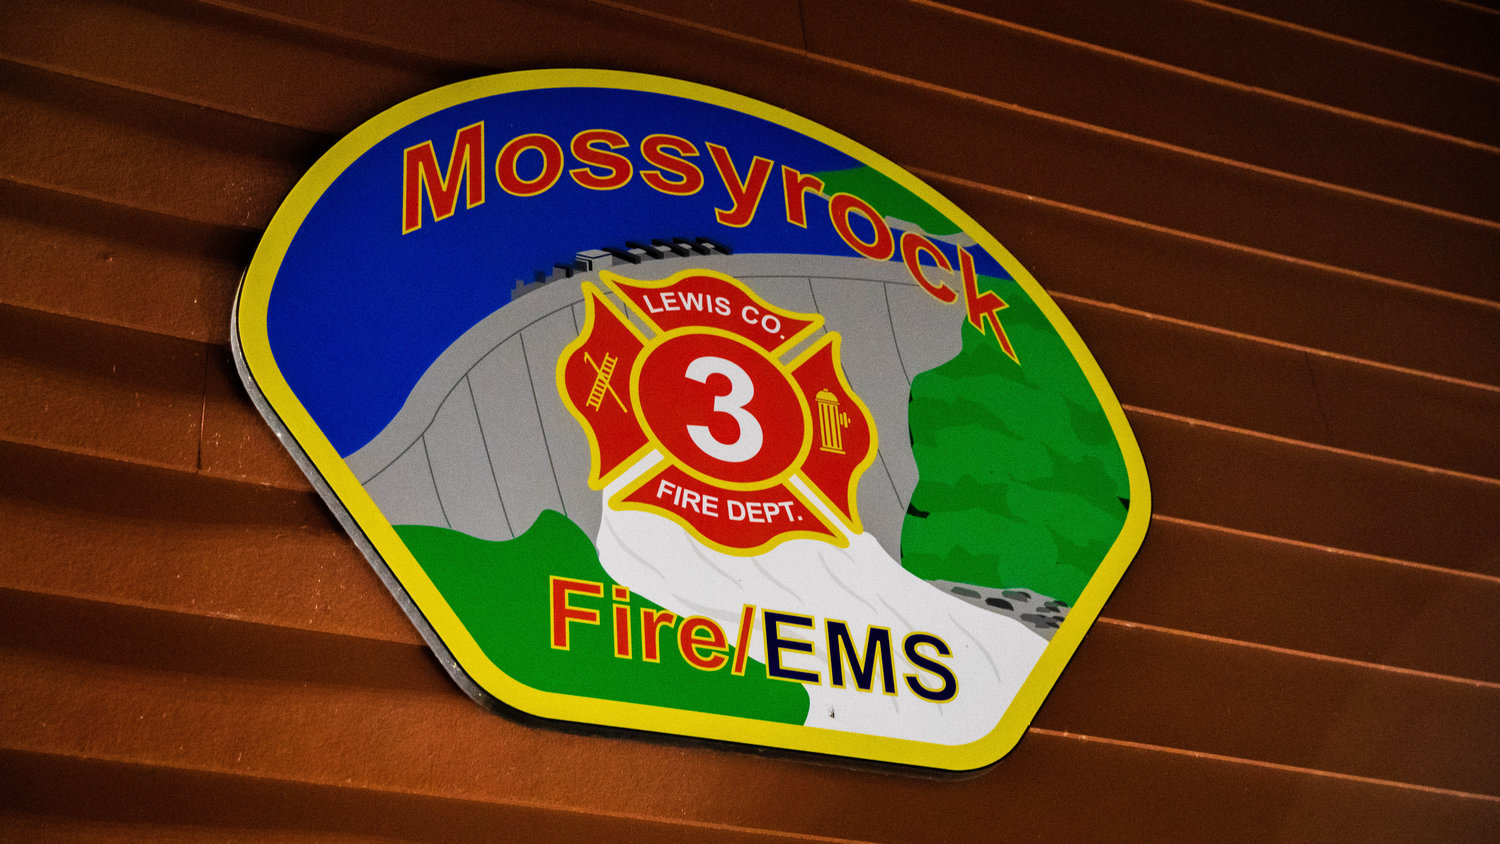 Lewis County Fire District 3 is located at 238 Mossyrock Road East in Mossyrock.